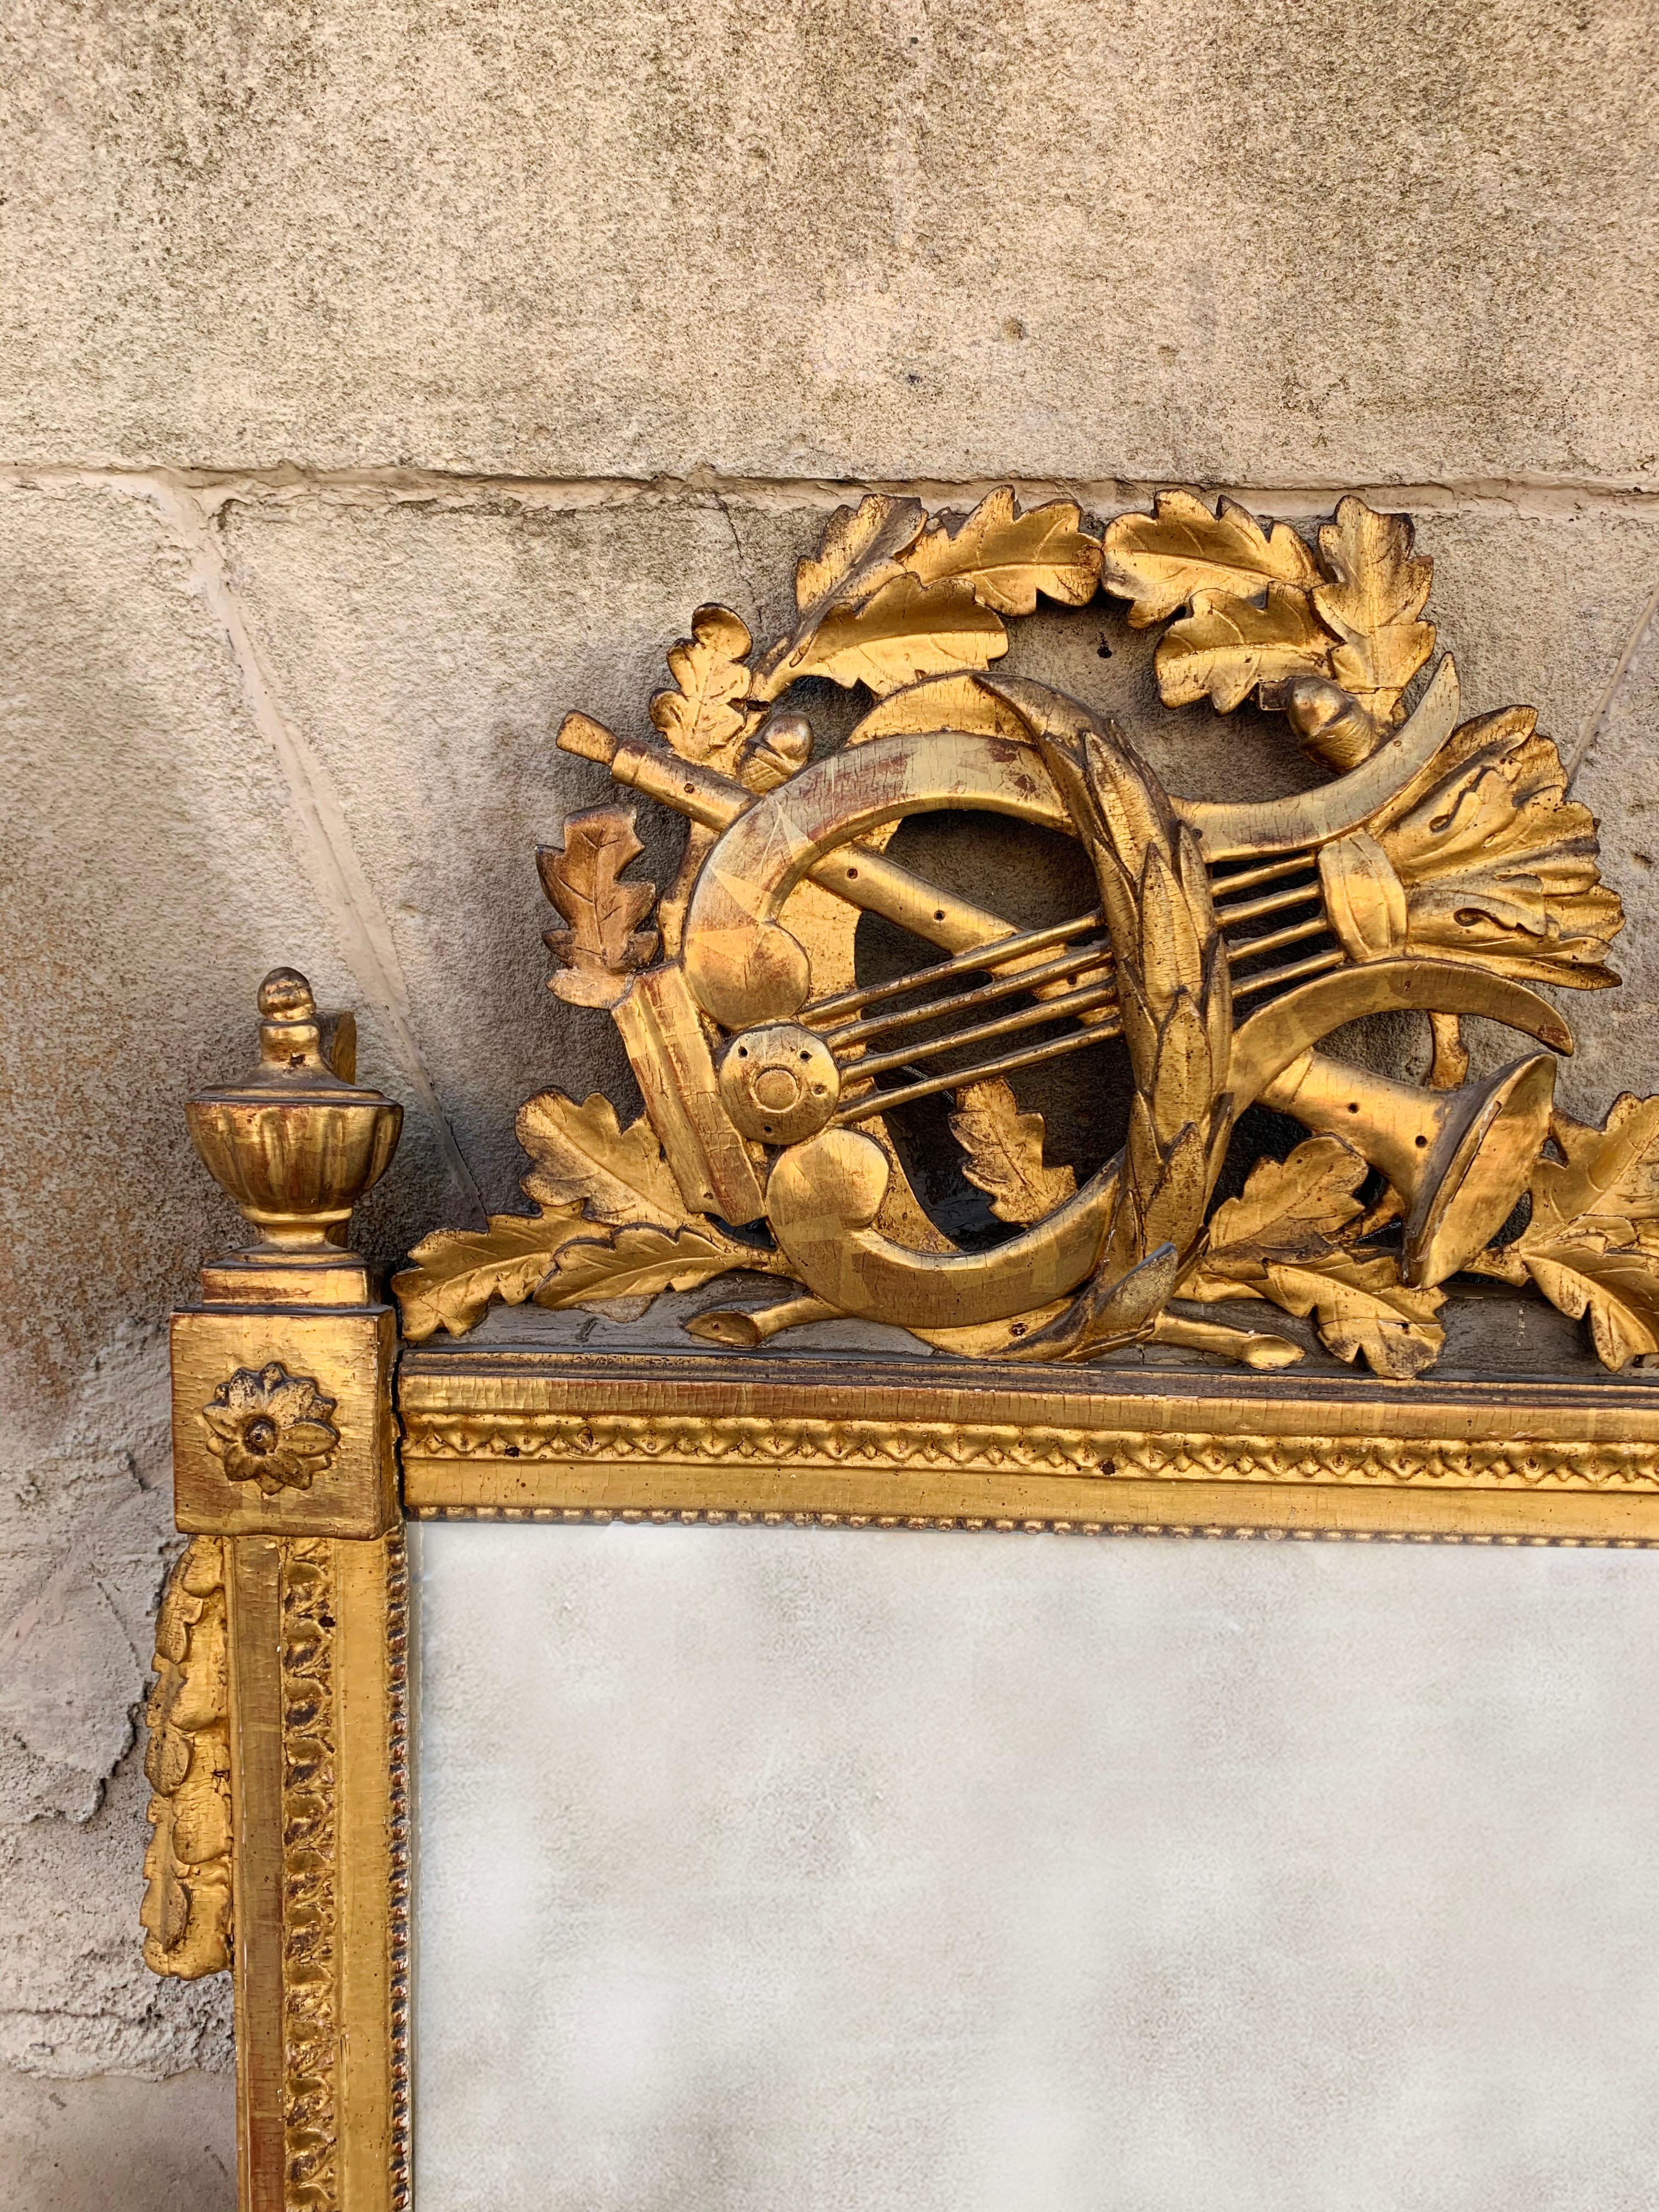 A beautiful gilded looking glass from late 18th century France with beautiful detailing and patina. The corona exhibits a laurel wreath and lyre harp, attributes of the god Apollo. The corners of the mirror frame are decorated with rosettes and the